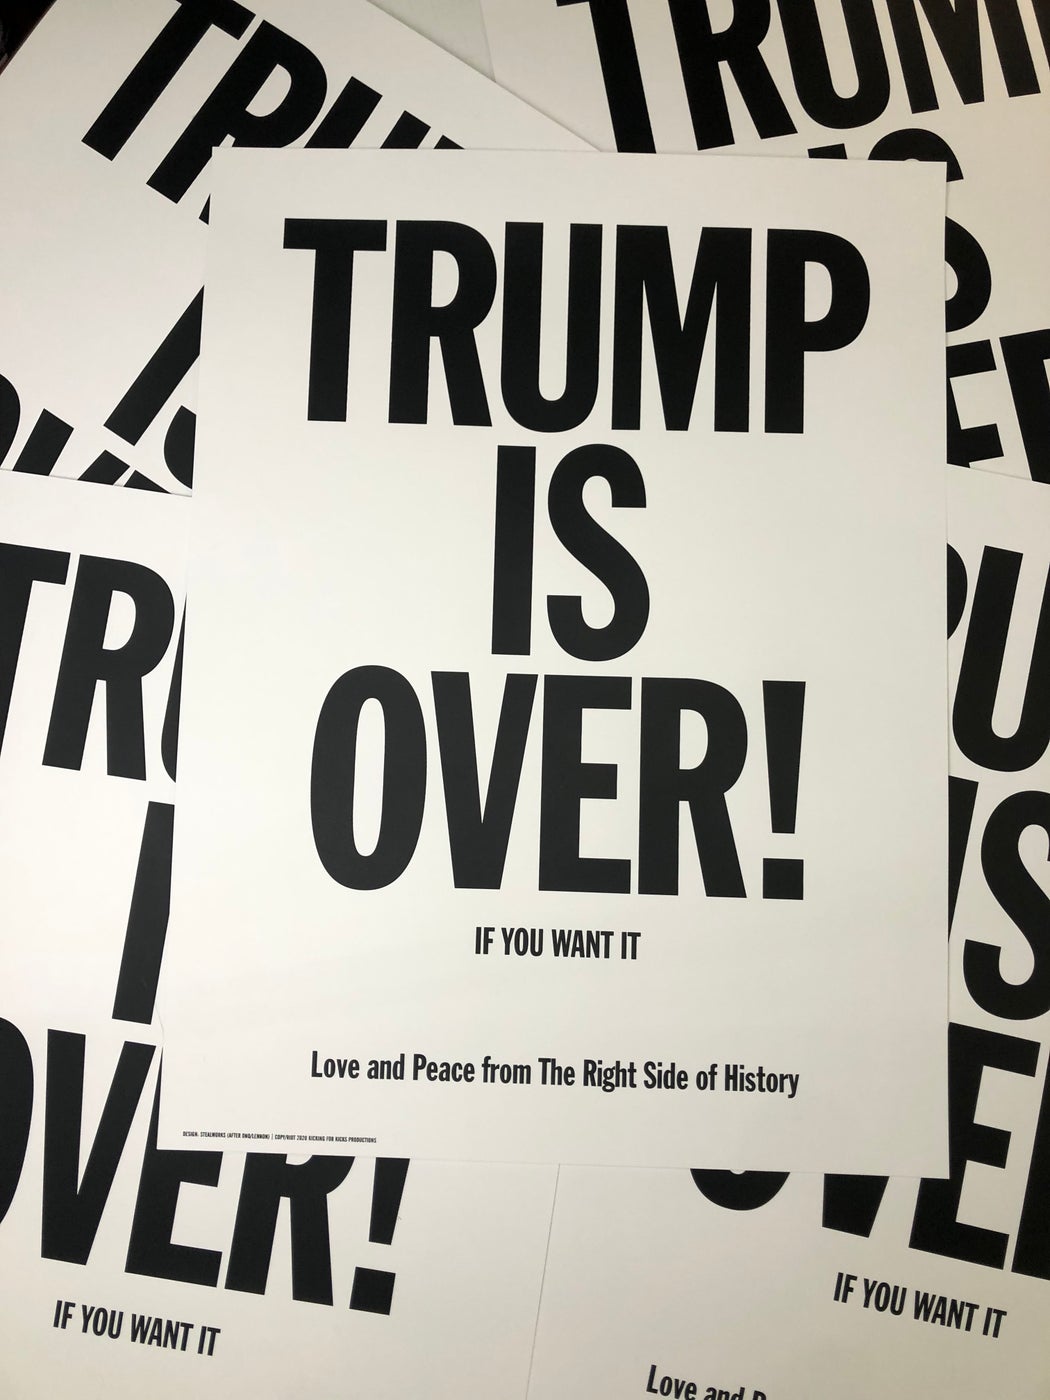 Stealworks "Trump Is Over!" Poster Print